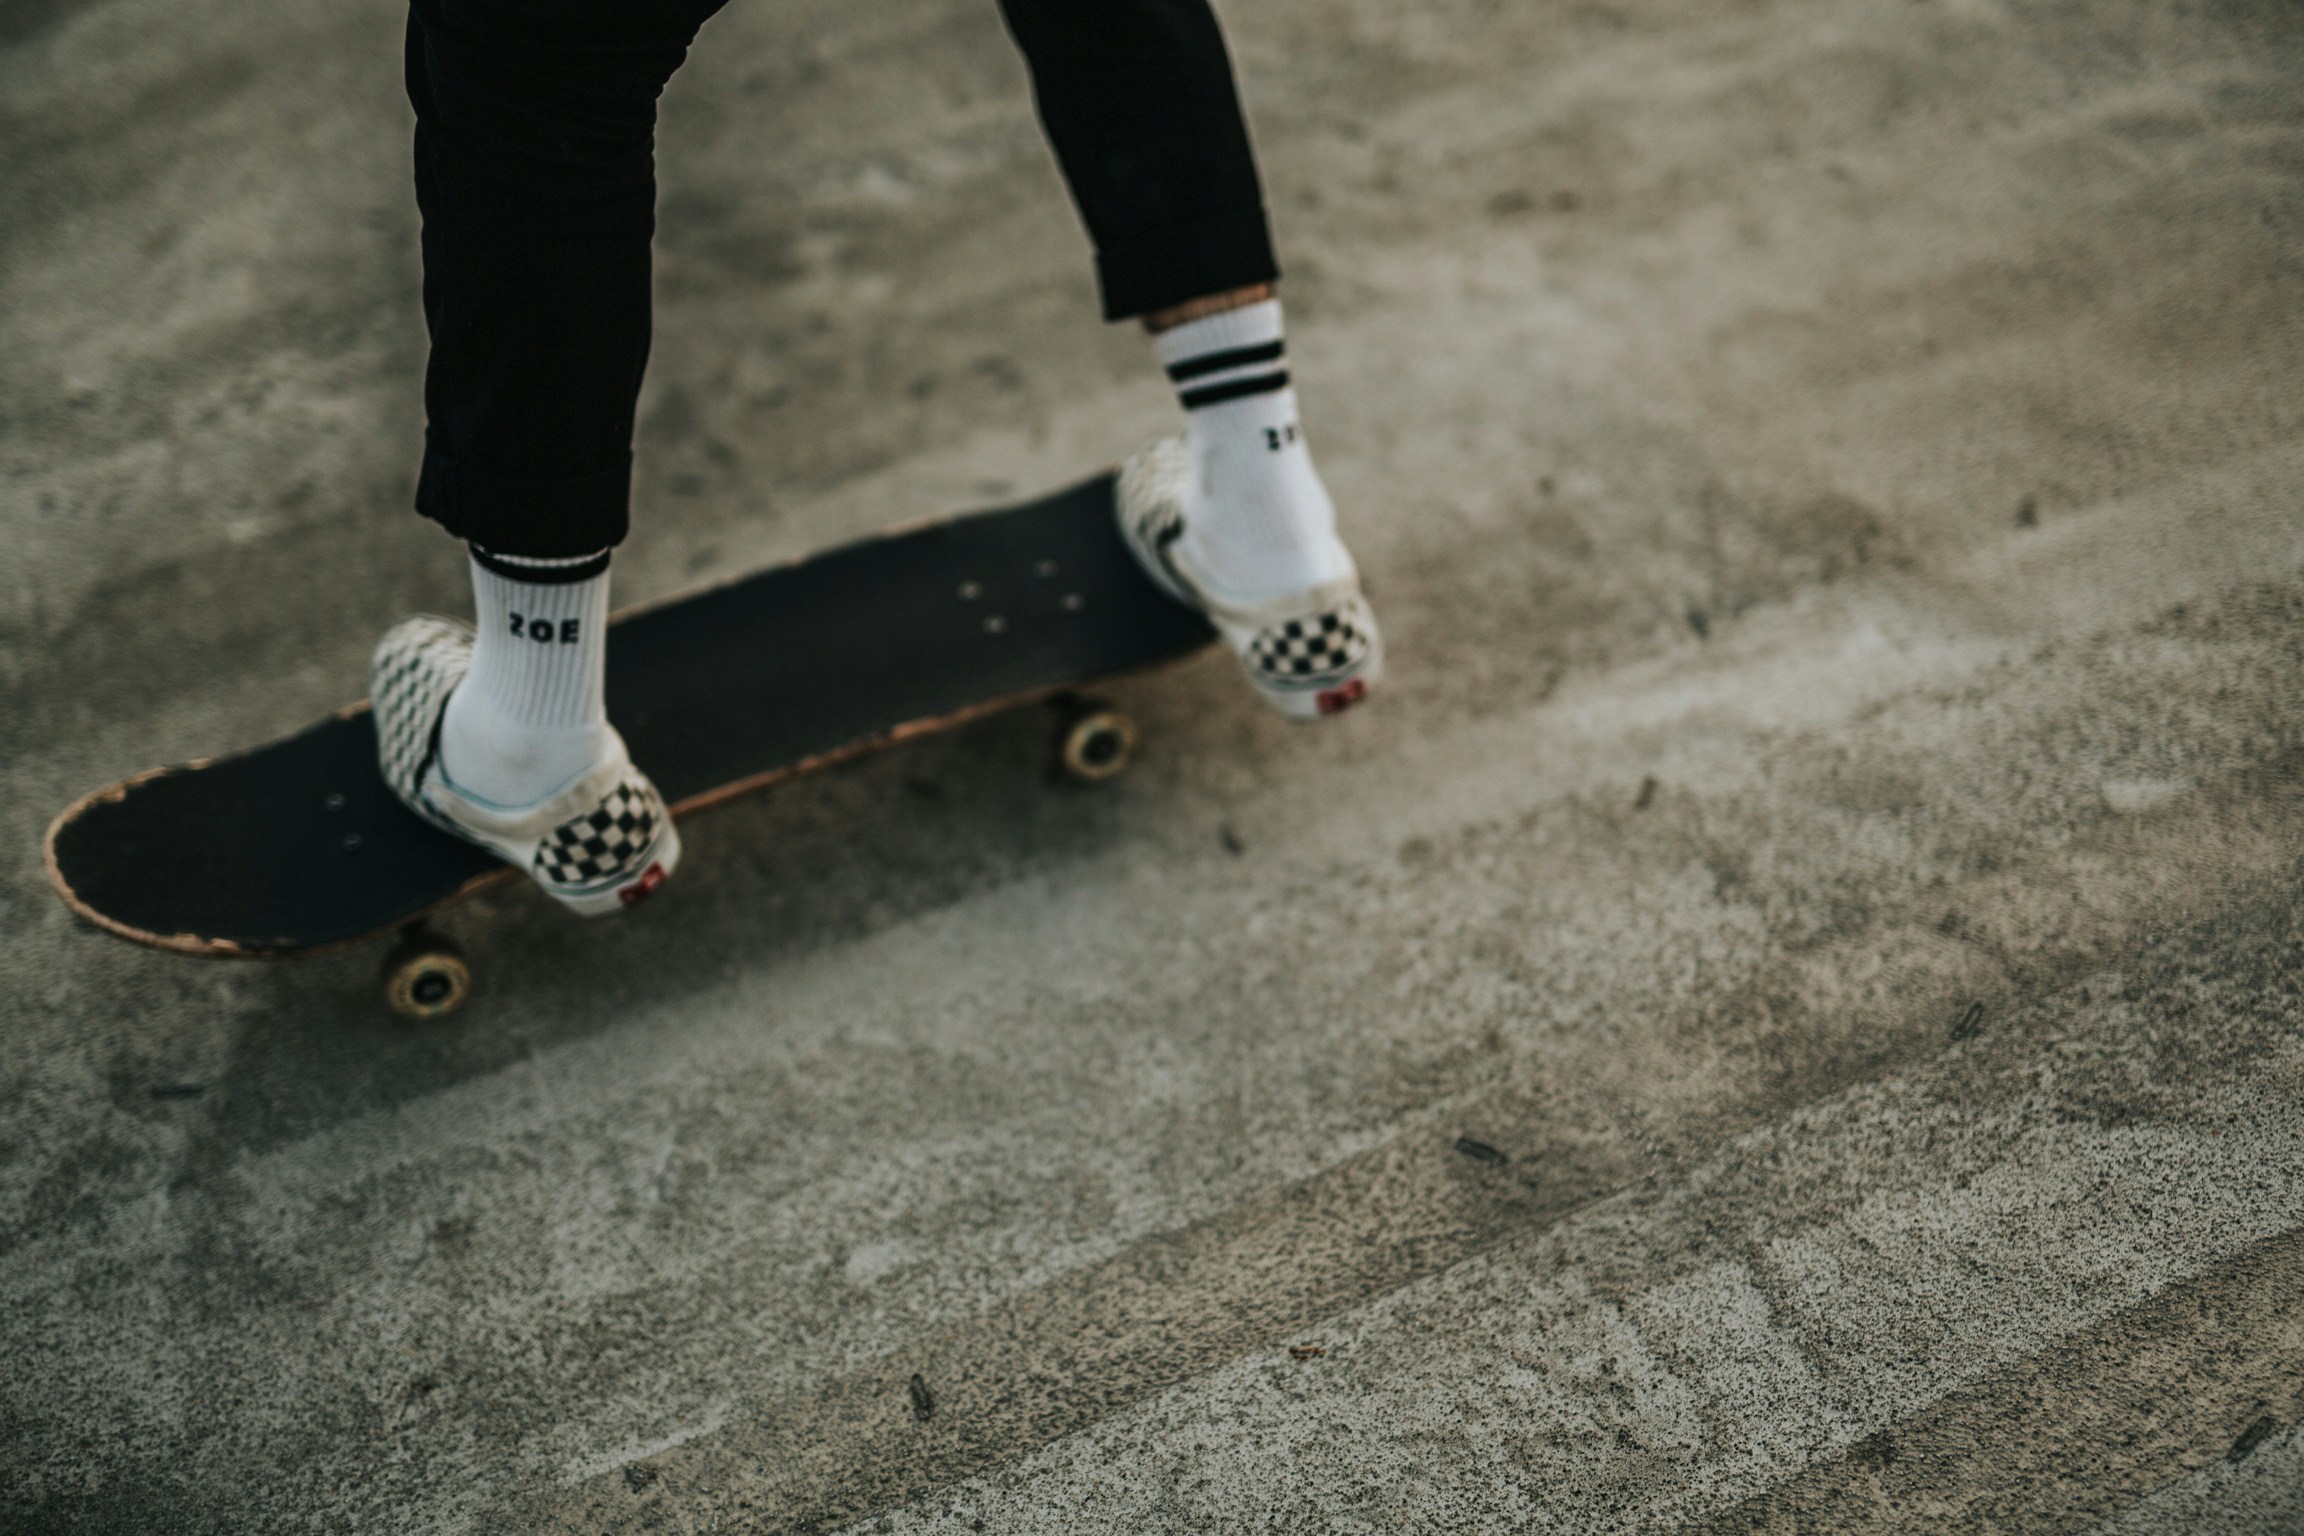 Choose from a curated selection of skateboard wallpapers for your mobile and desktop screens. Always free on Unsplash.